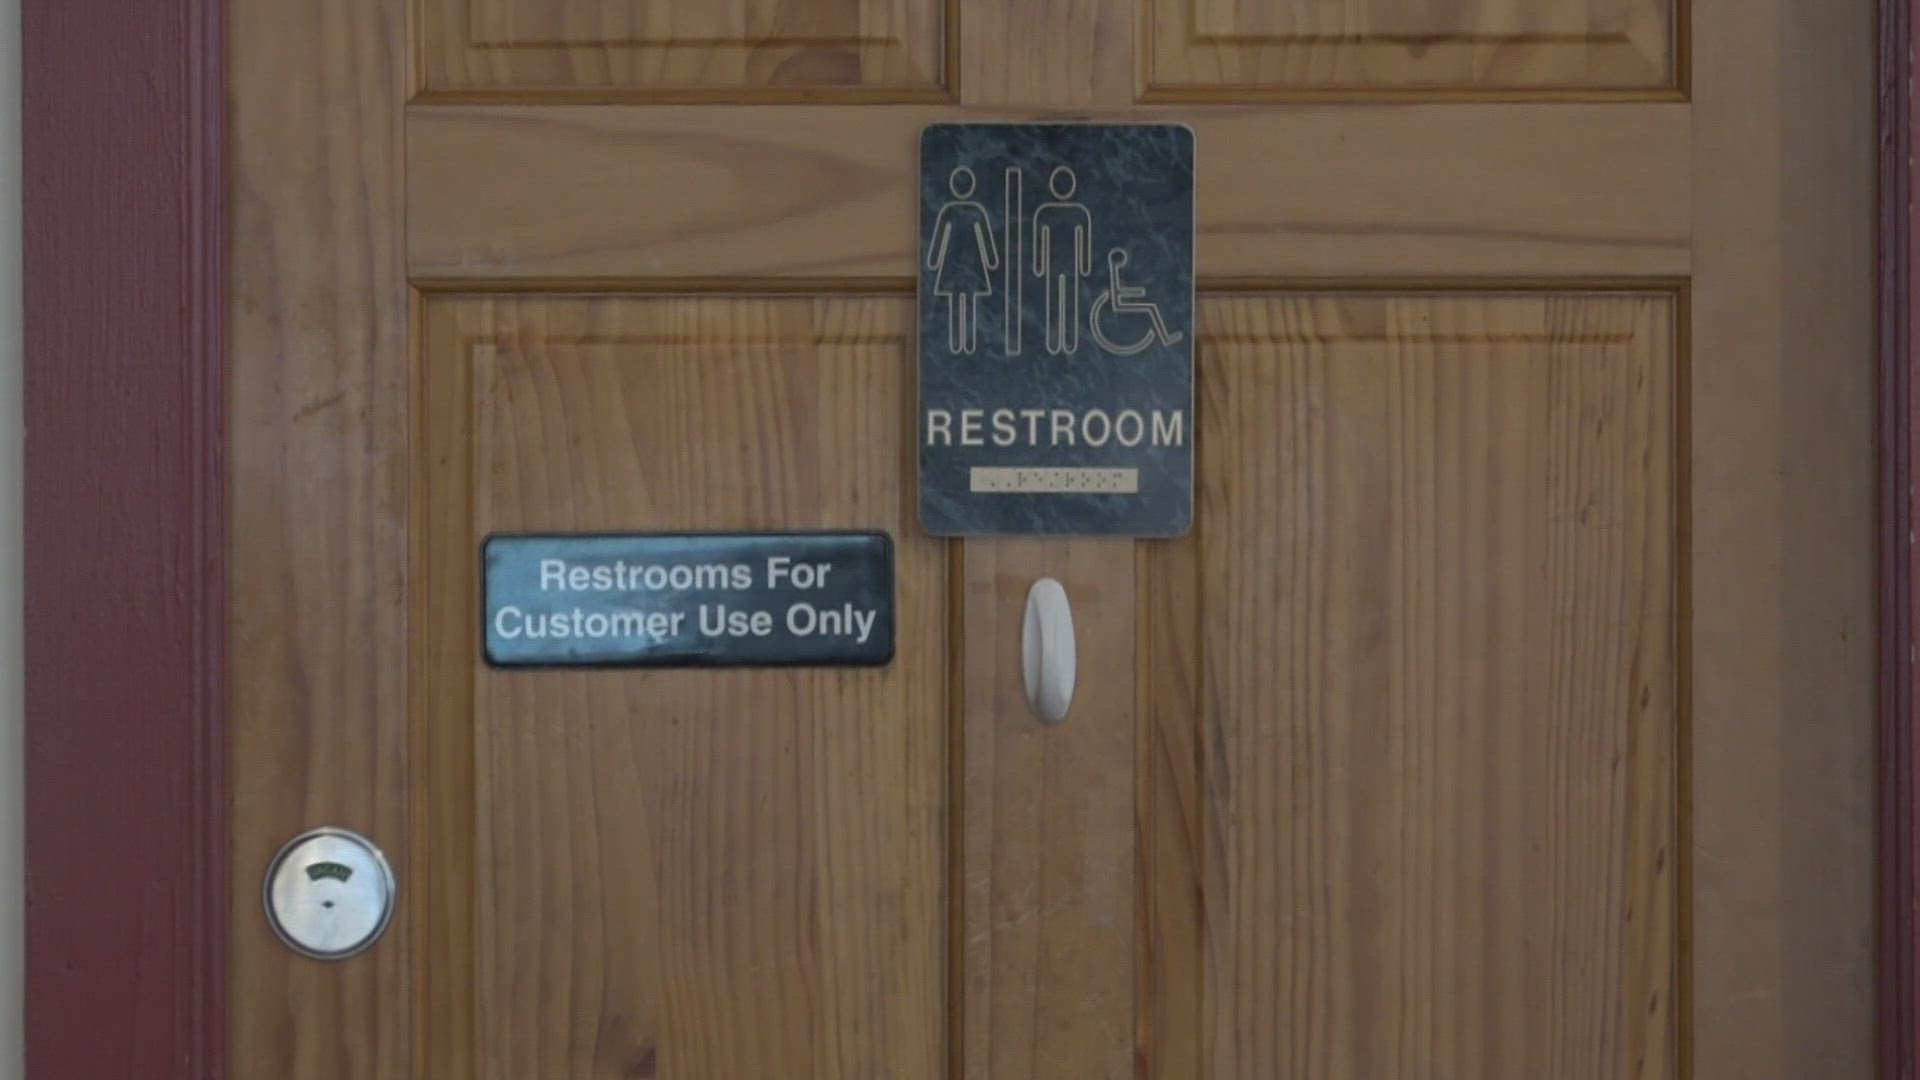 Bangor is considering adding bathrooms at several public parks.